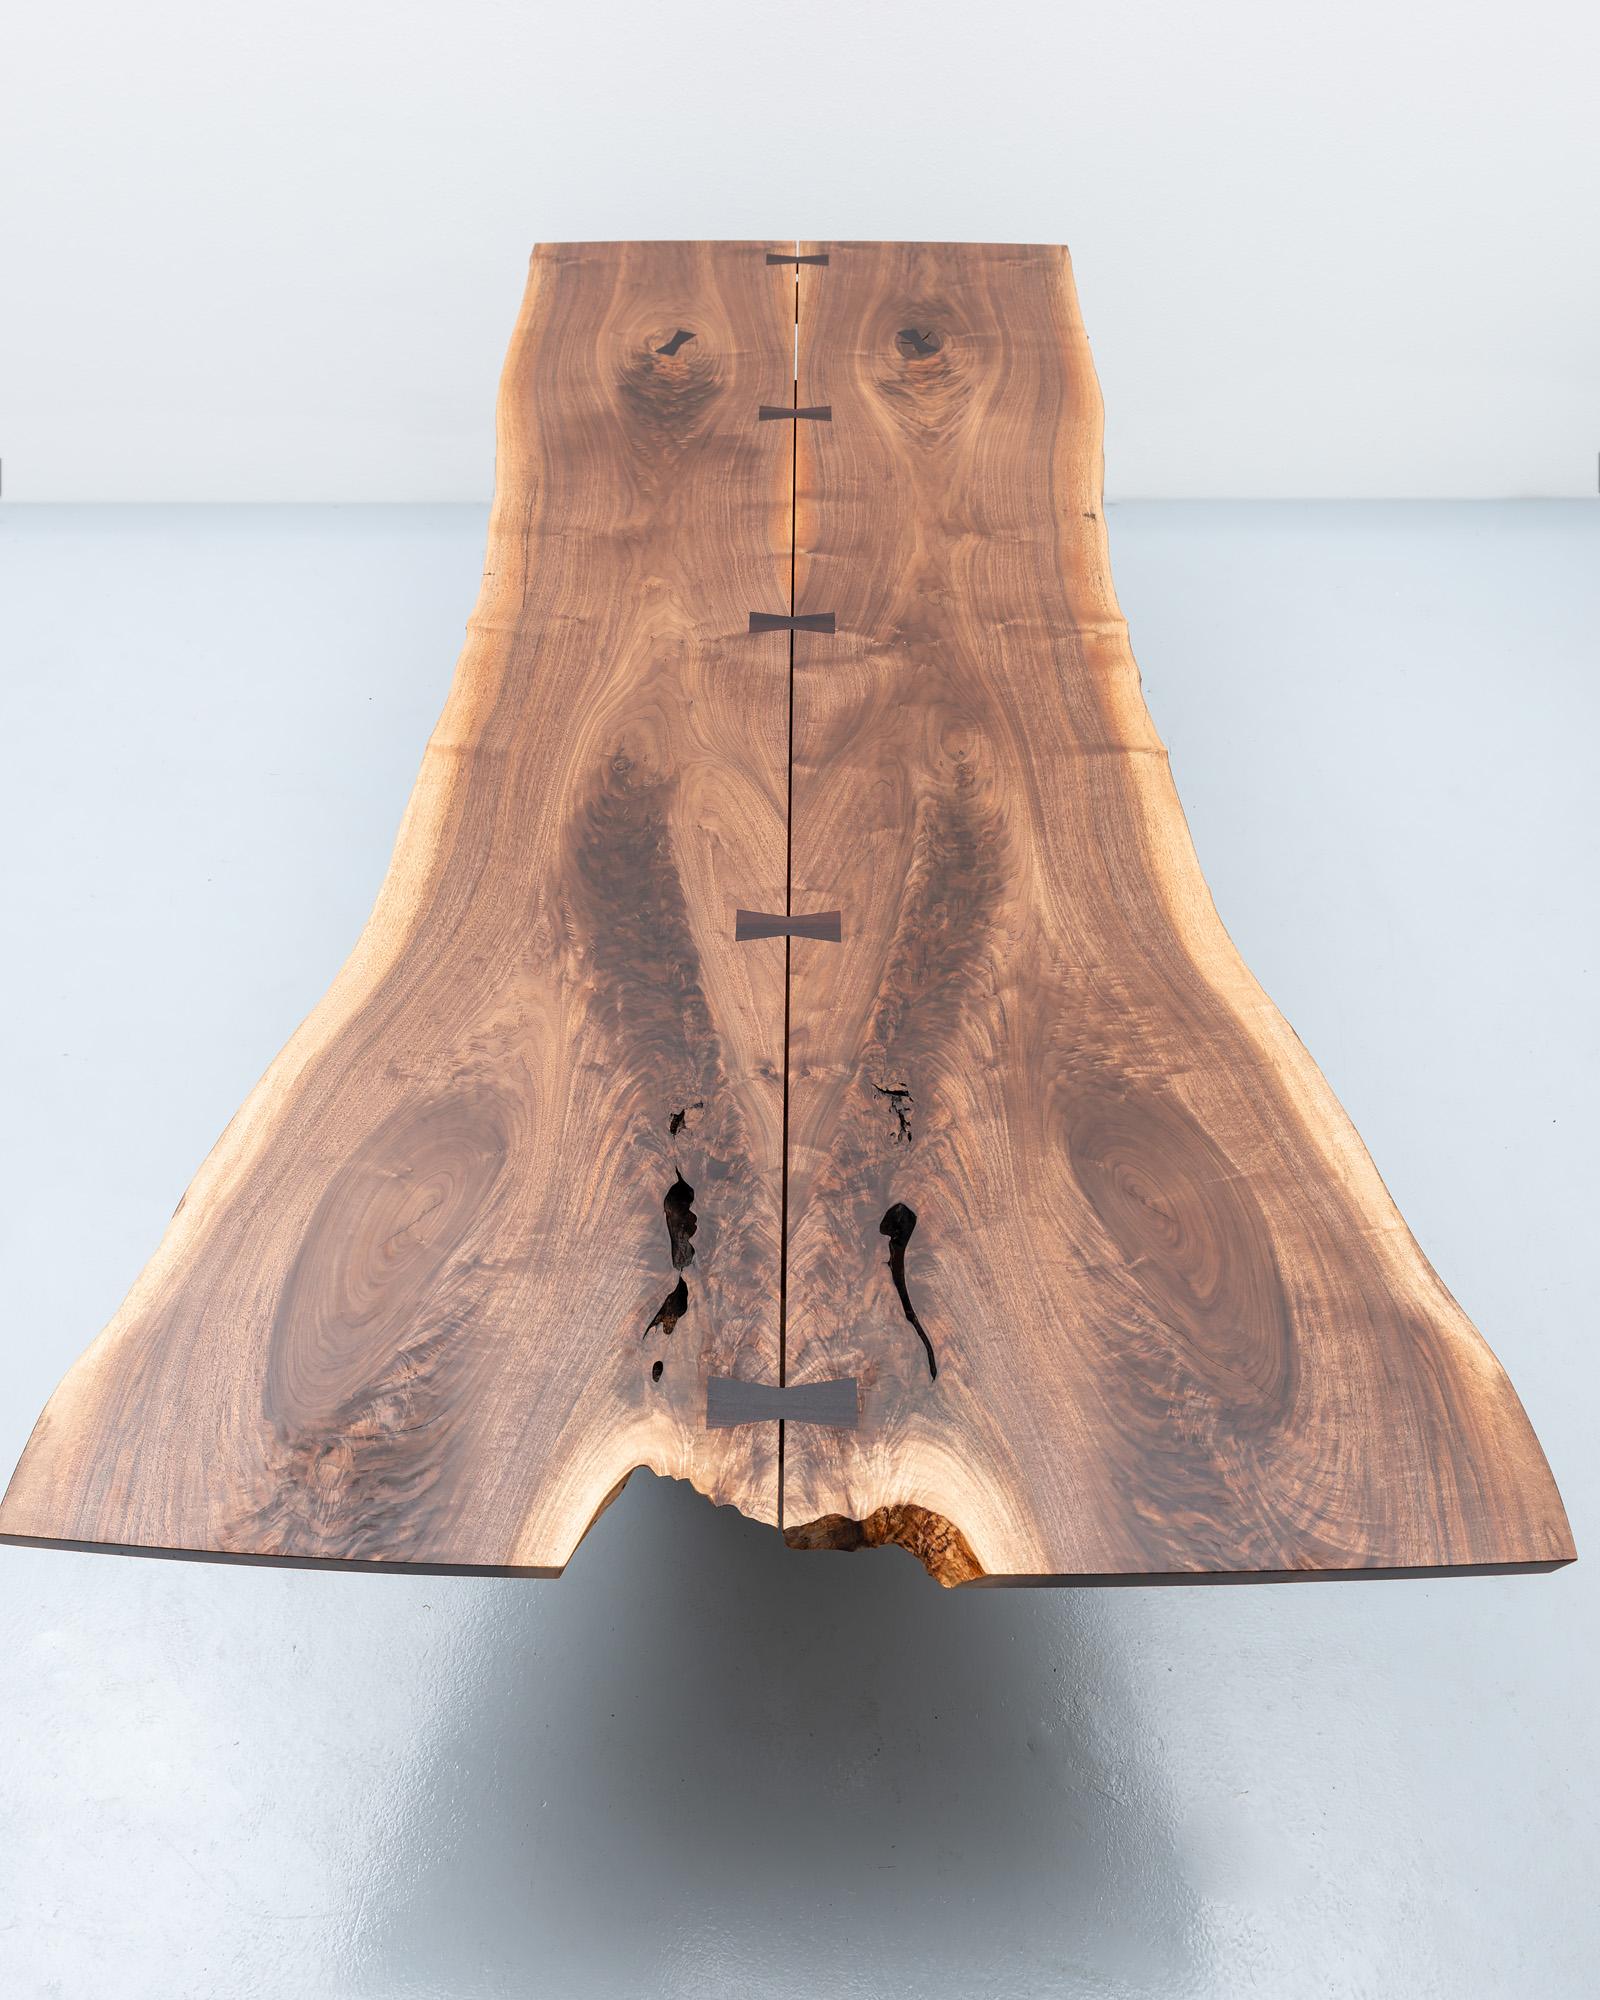 Substantial and impressive dining table by Mira Nakashima created for the Objects of Art Exhibition in Santa Fe, August, 2018. This was the first exhibition in which Mira exhibited her work alongside her father, George's, work. 

A stunning